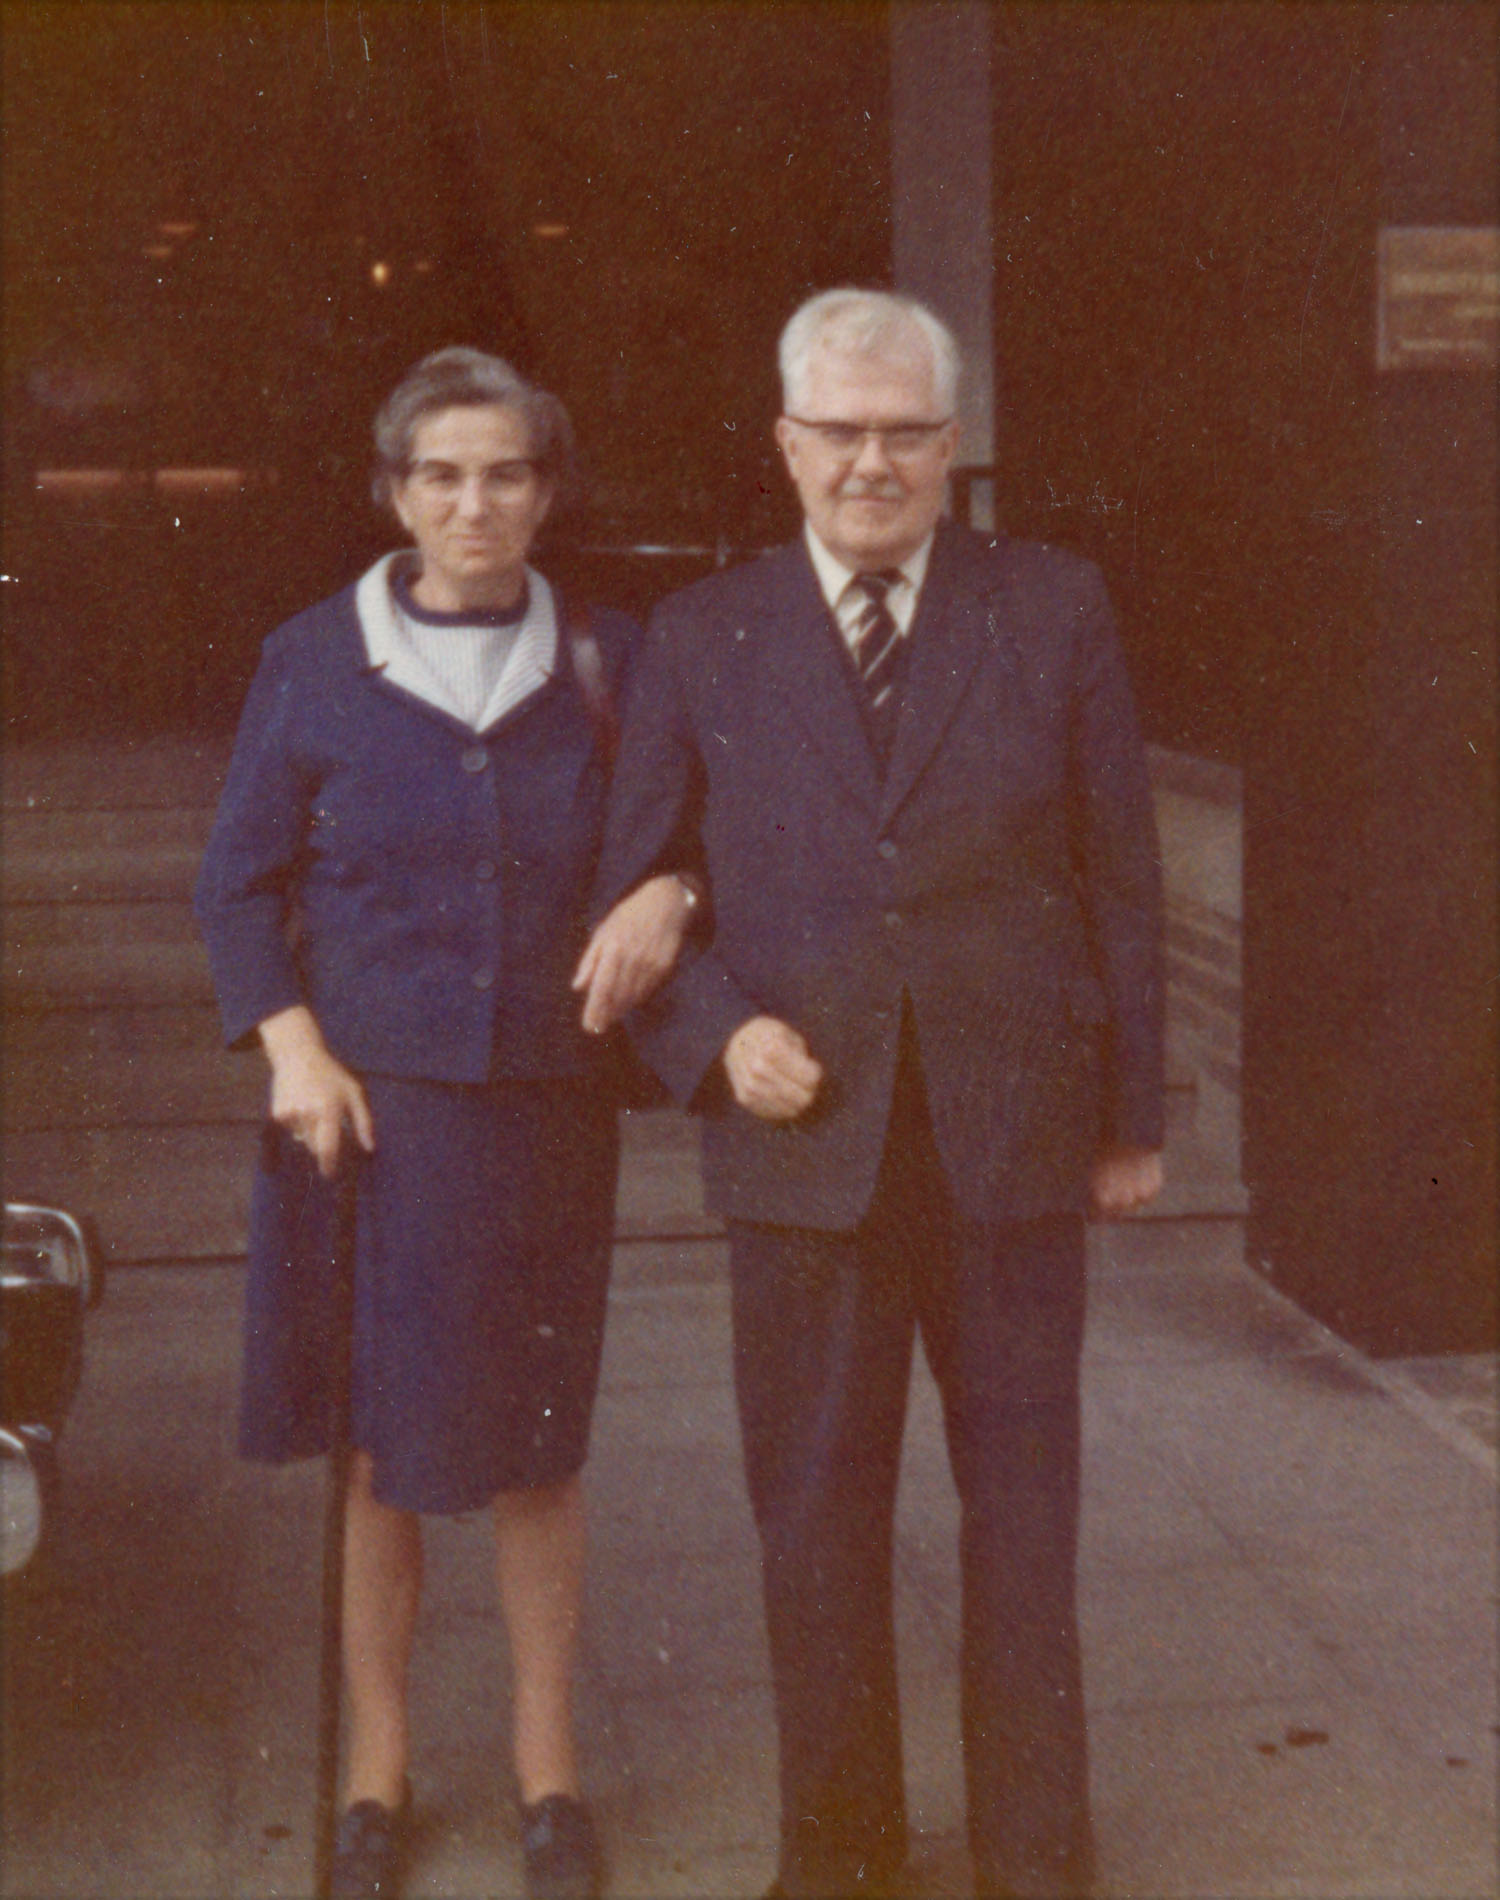 Nora and Frank Smithies